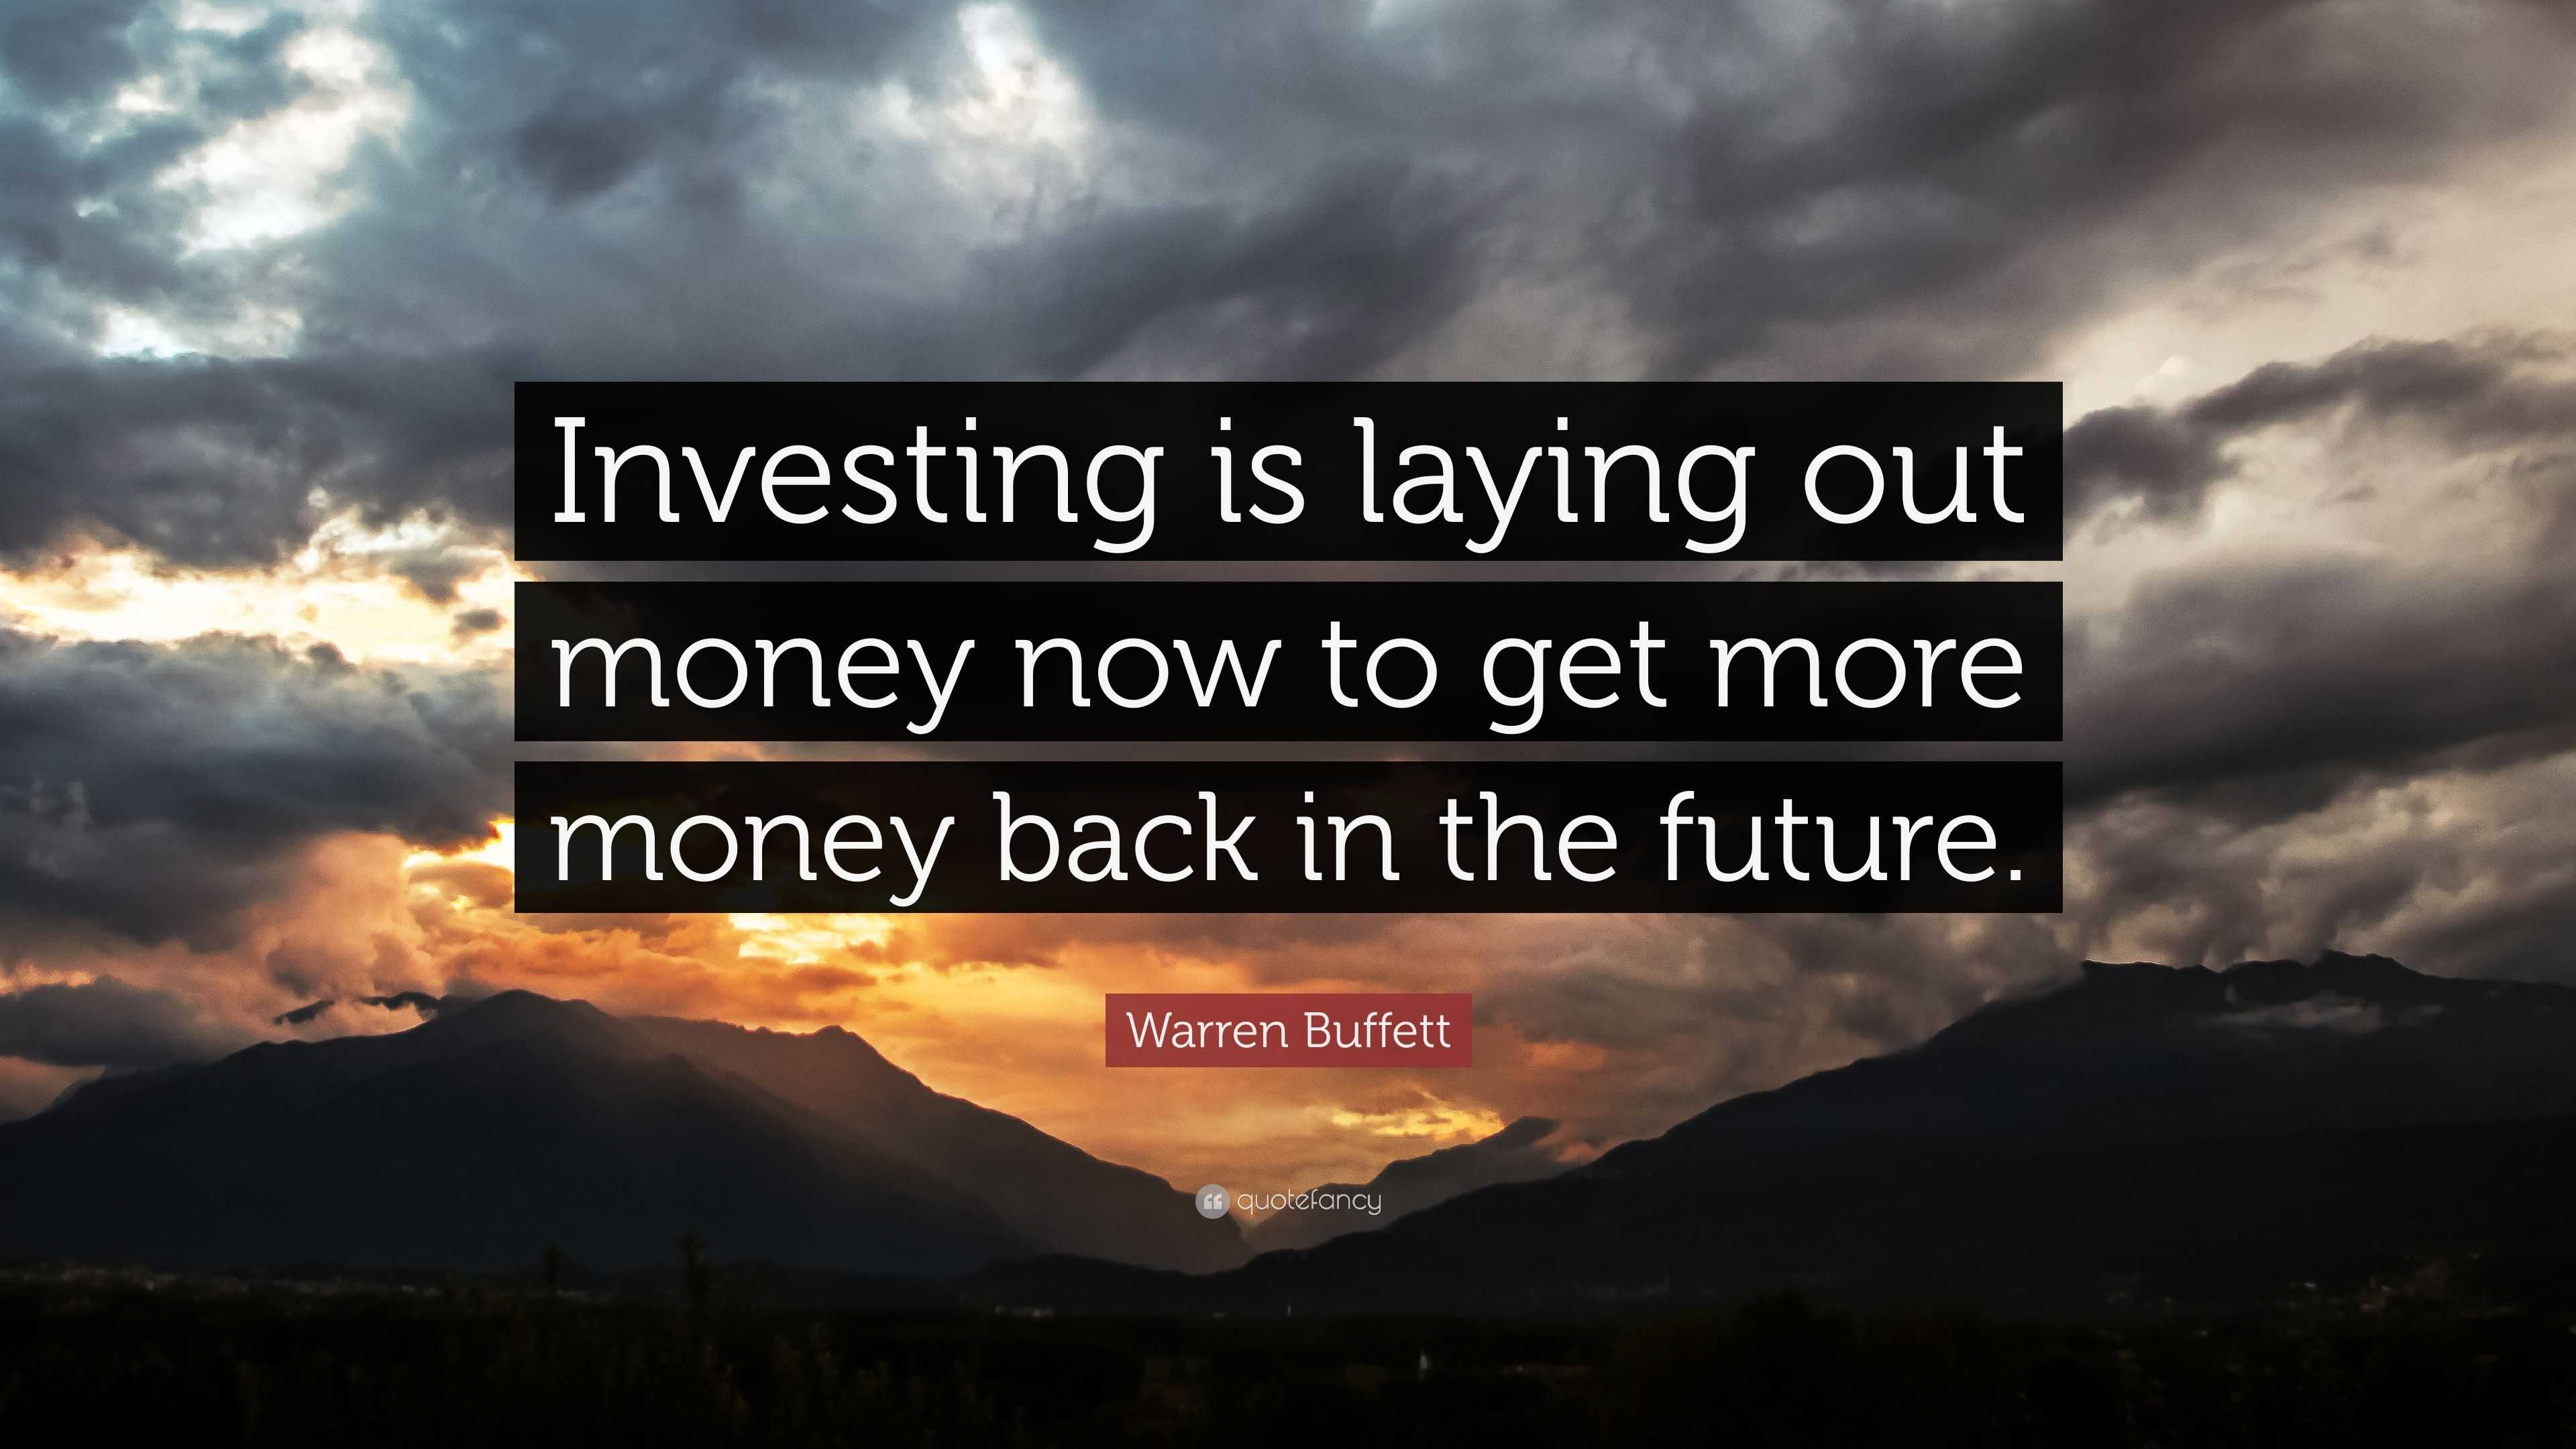 Warren Buffett Quote “Investing is laying out money now